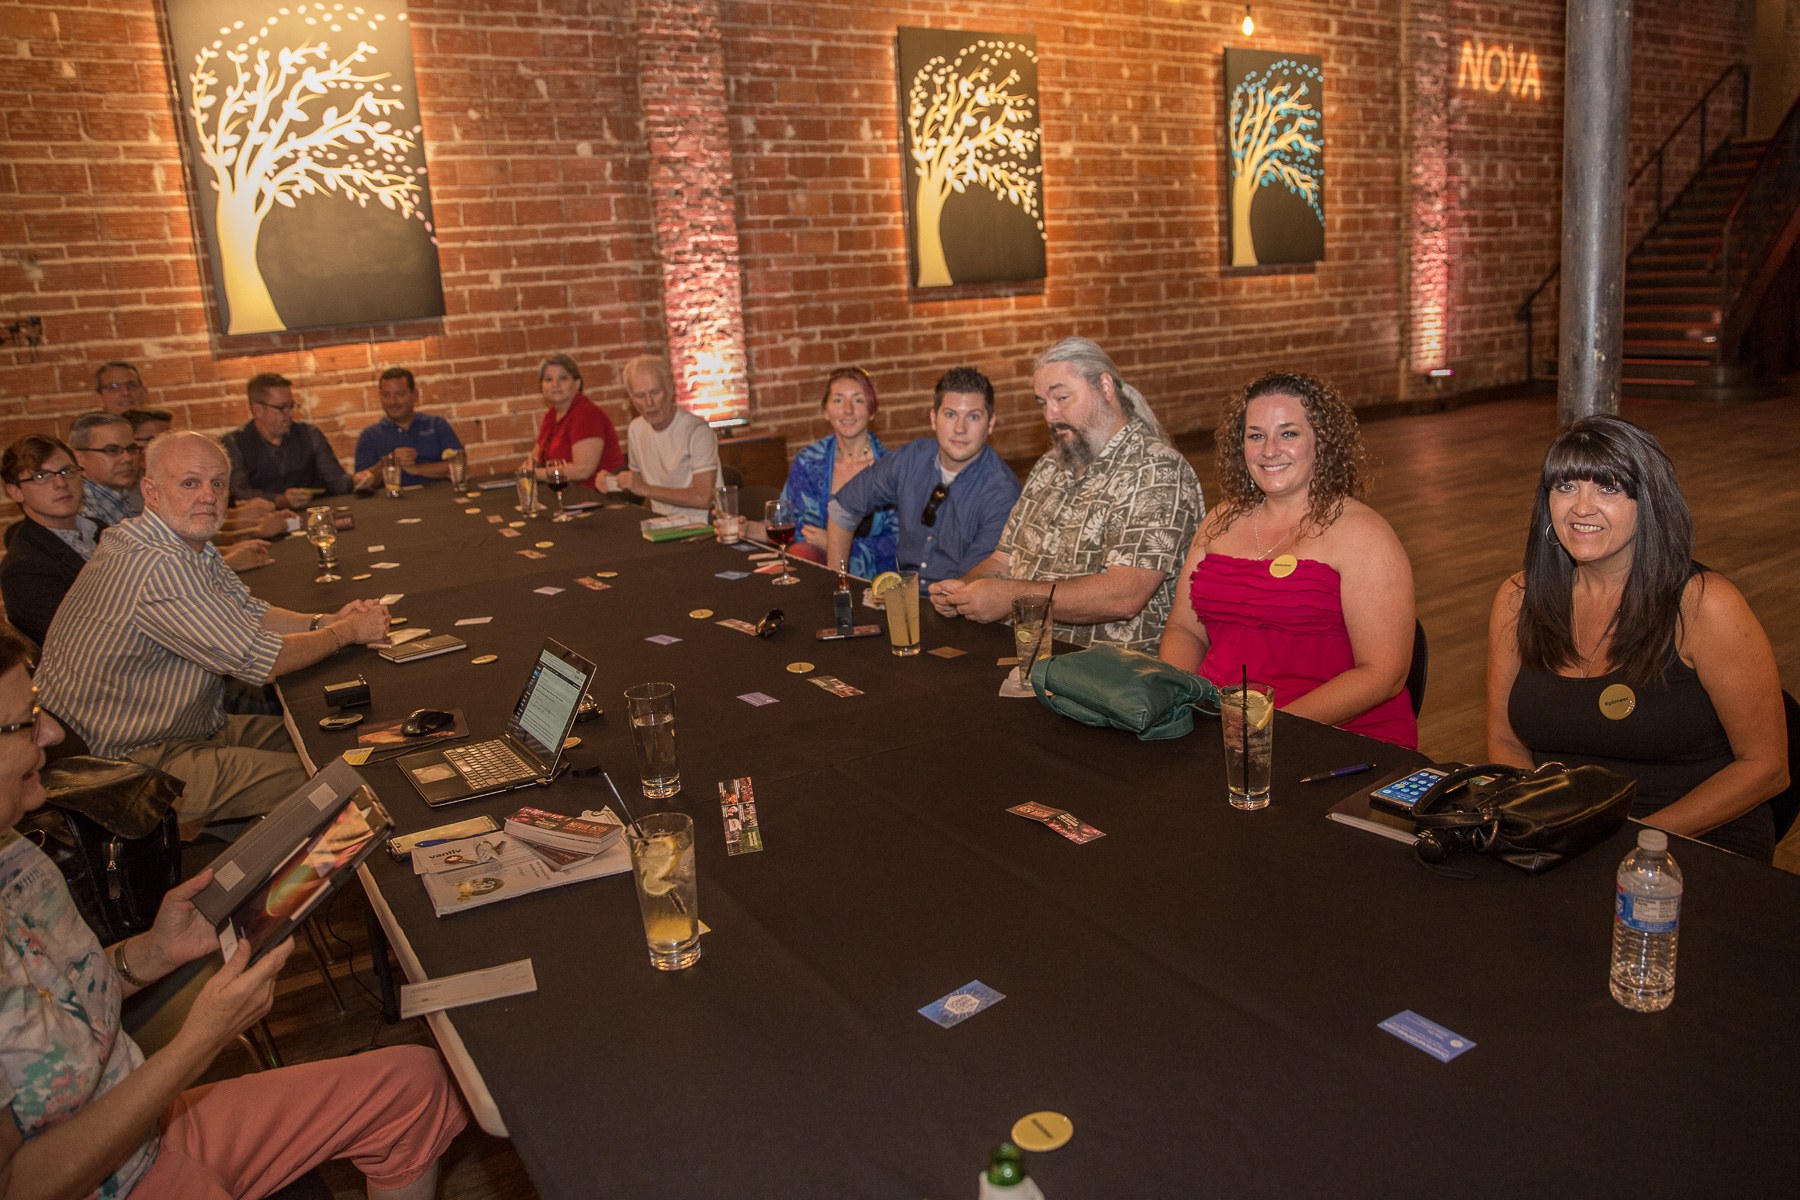 Swarm.City Boardwalk Release for Blockchain Enabled Commerce discussed here at Entrepreneur Social Club in DTSP at historic wedding and event venue NOVA 535 with Cate Colgan #pioneer